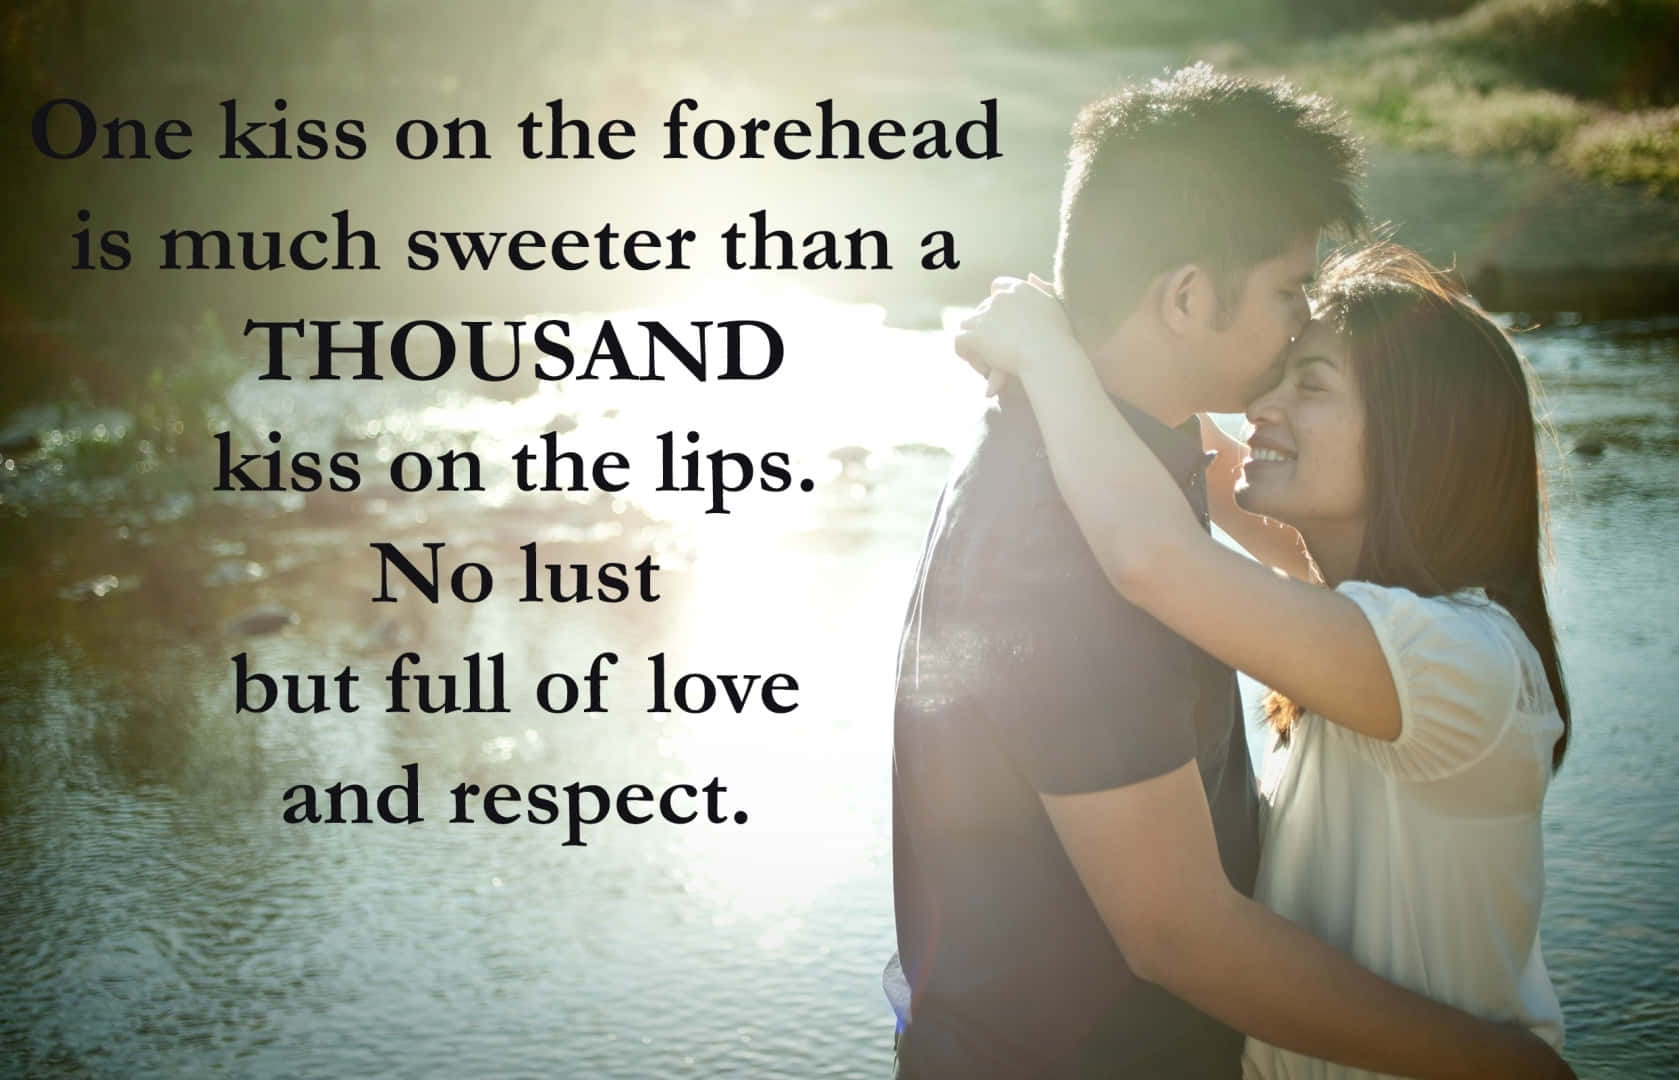 Show your love and affection with a forehead kiss.